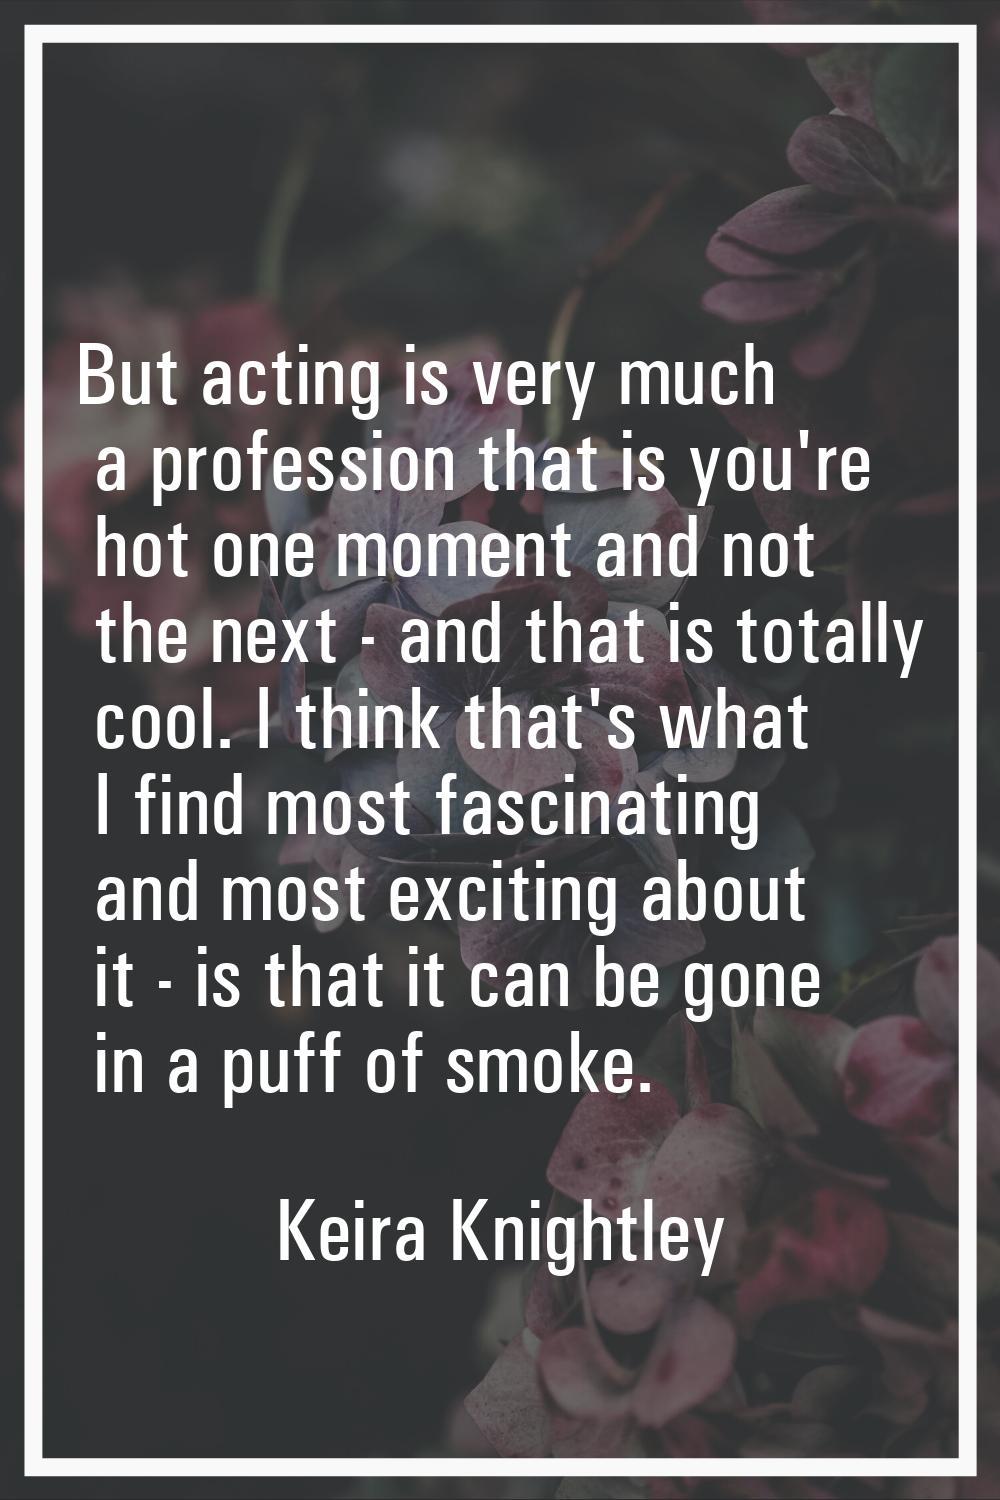 But acting is very much a profession that is you're hot one moment and not the next - and that is t